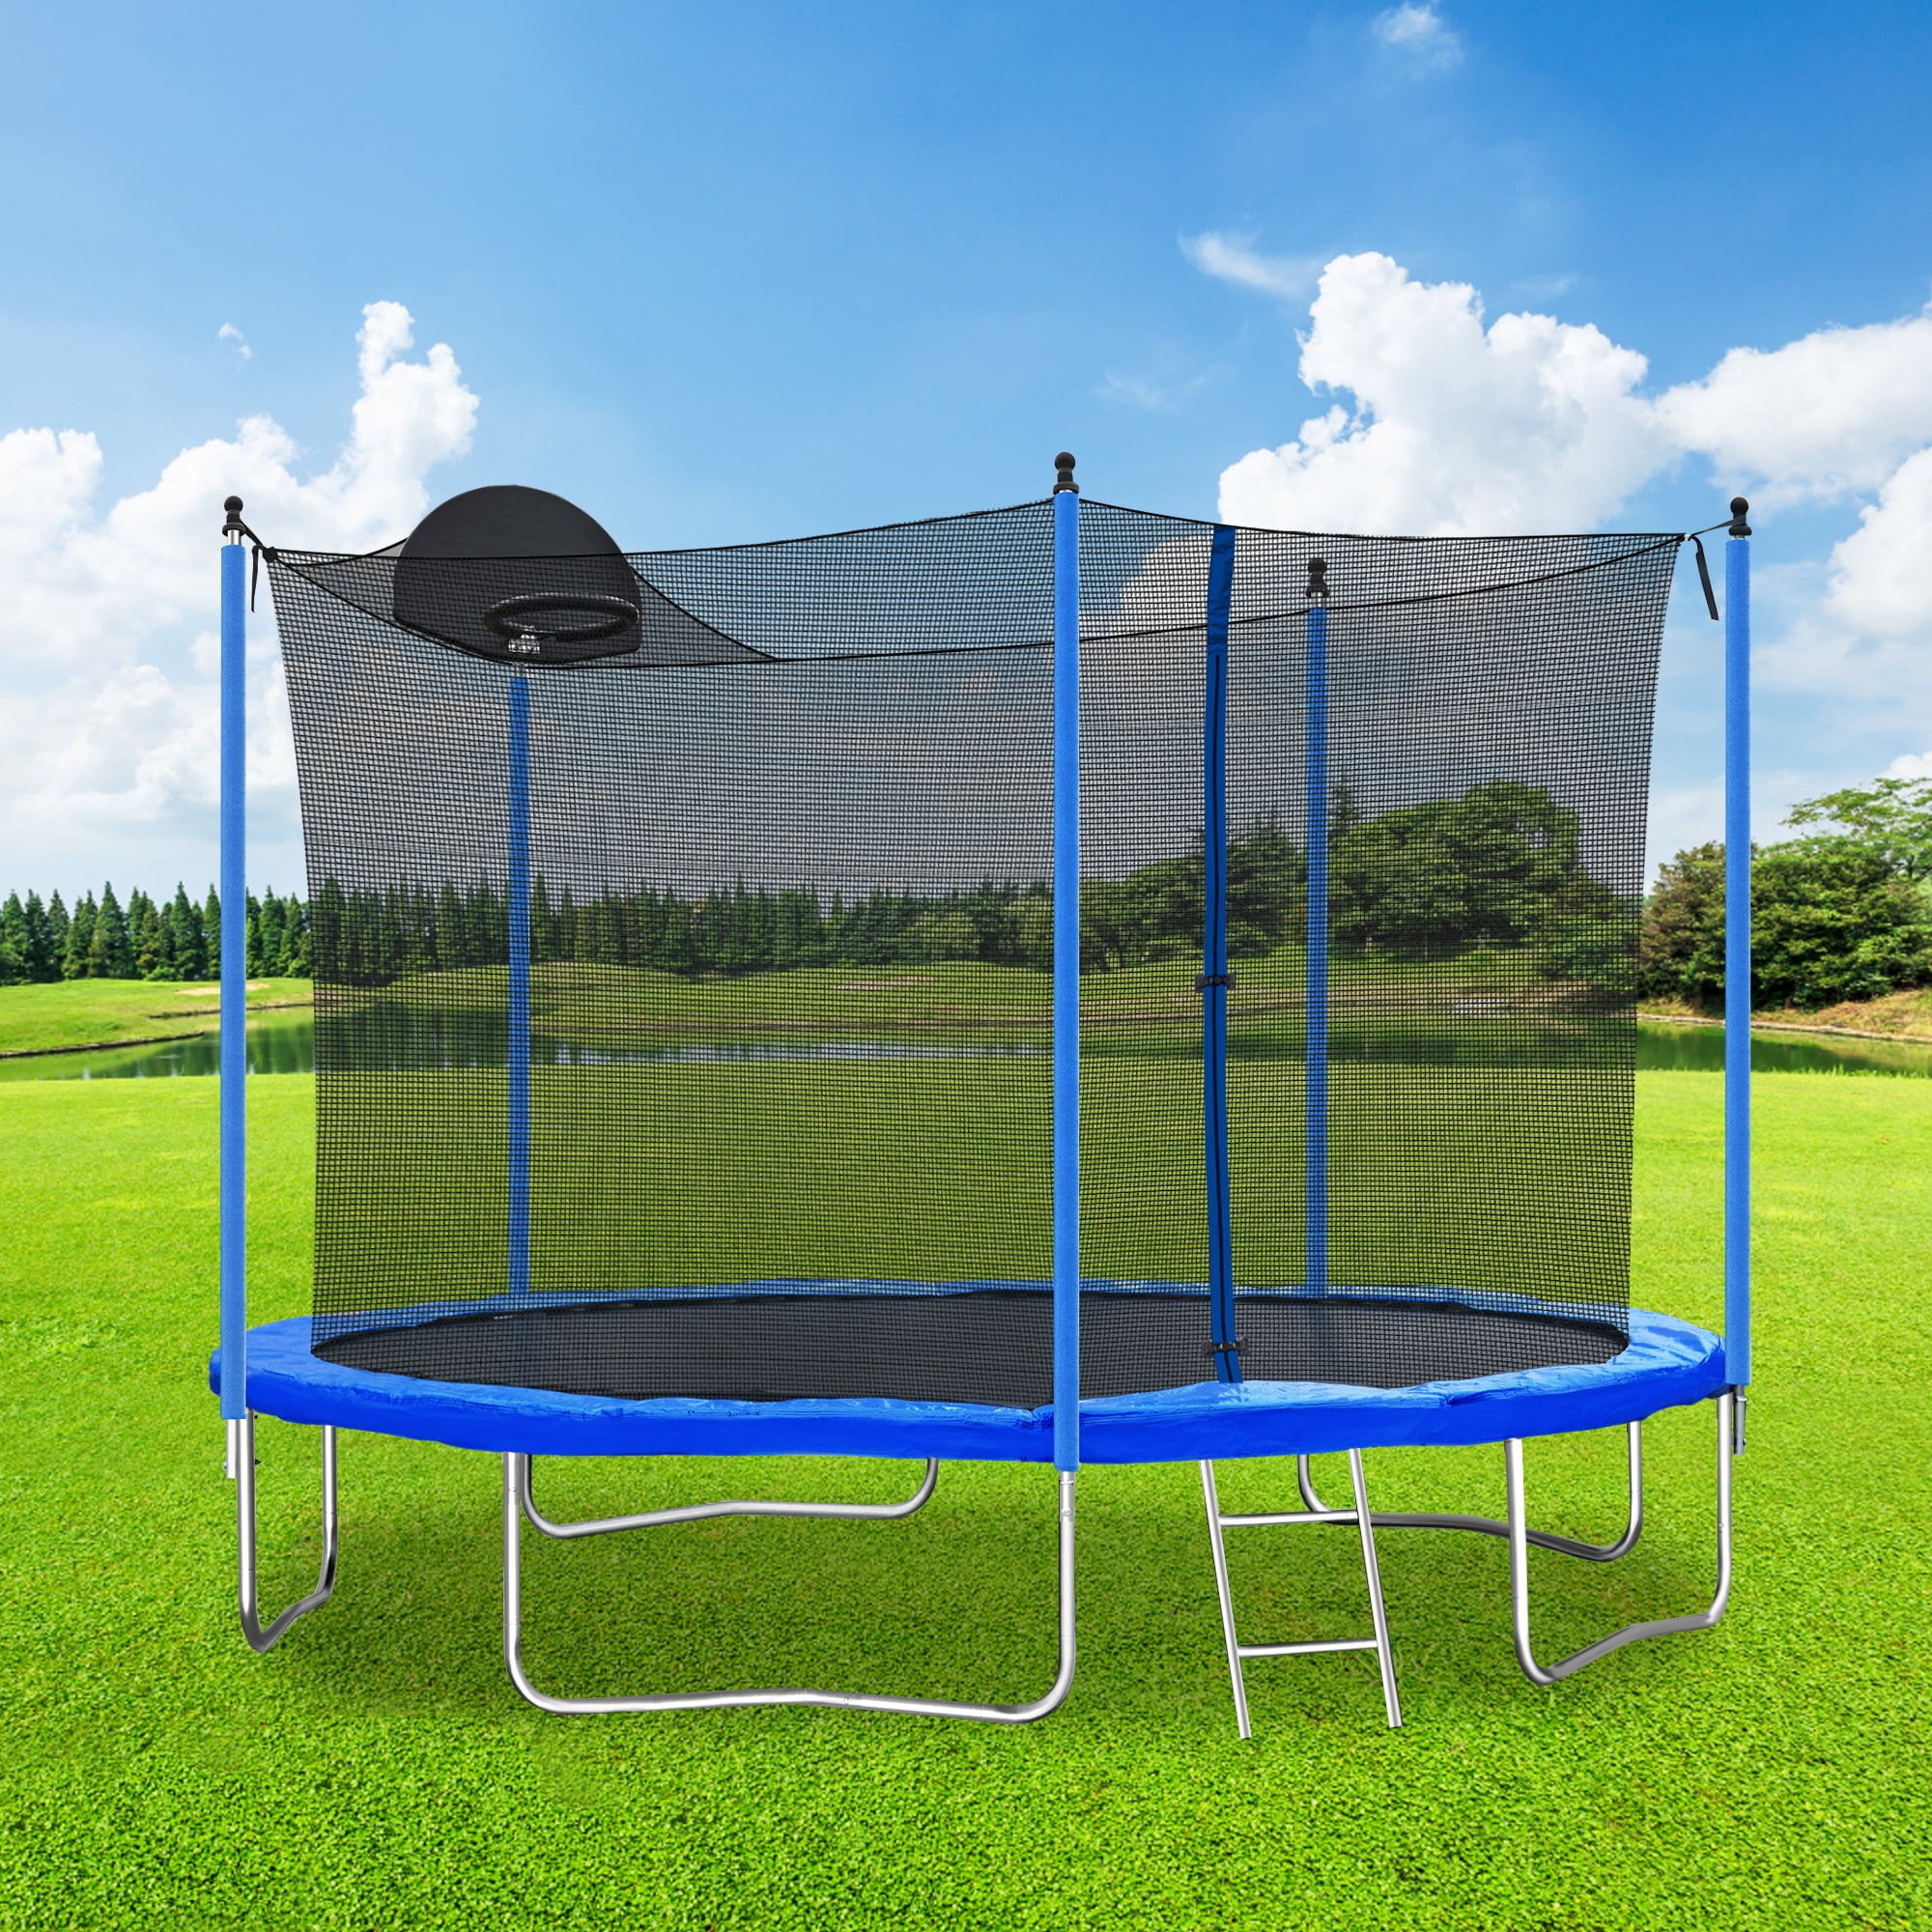 uhomepro 12-Foot Kids Trampoline for Outdoor with Board, Enclosure Net, Steel Tube, Circular Trampolines for Adults Kids, Family Jumping Ladder, Kids Round Trampoline - Walmart.com